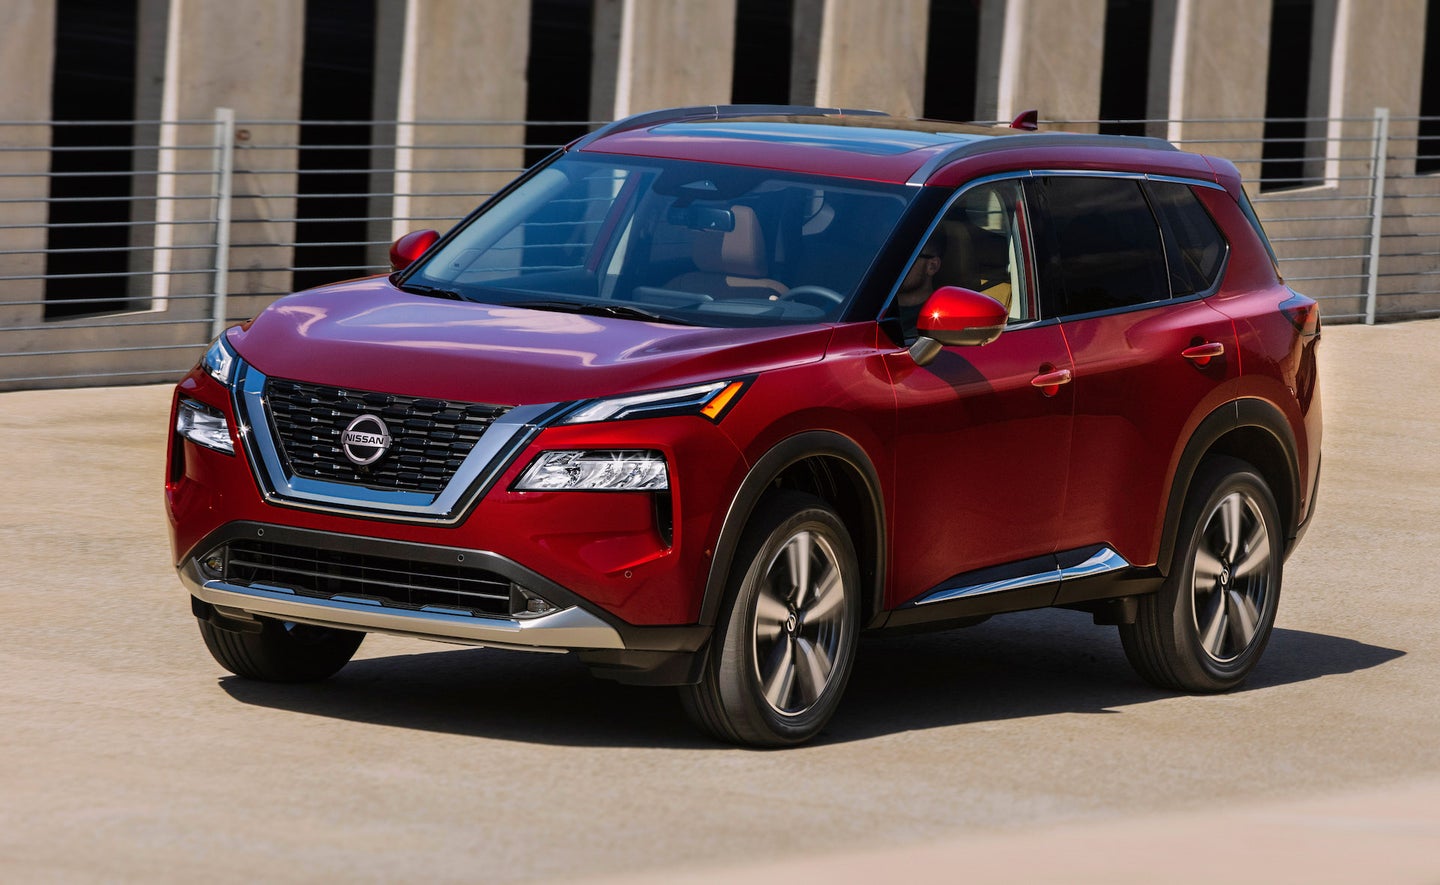 The 2021 Nissan Rogue Brings Seriously Advanced Driver Safety Tech to the Masses